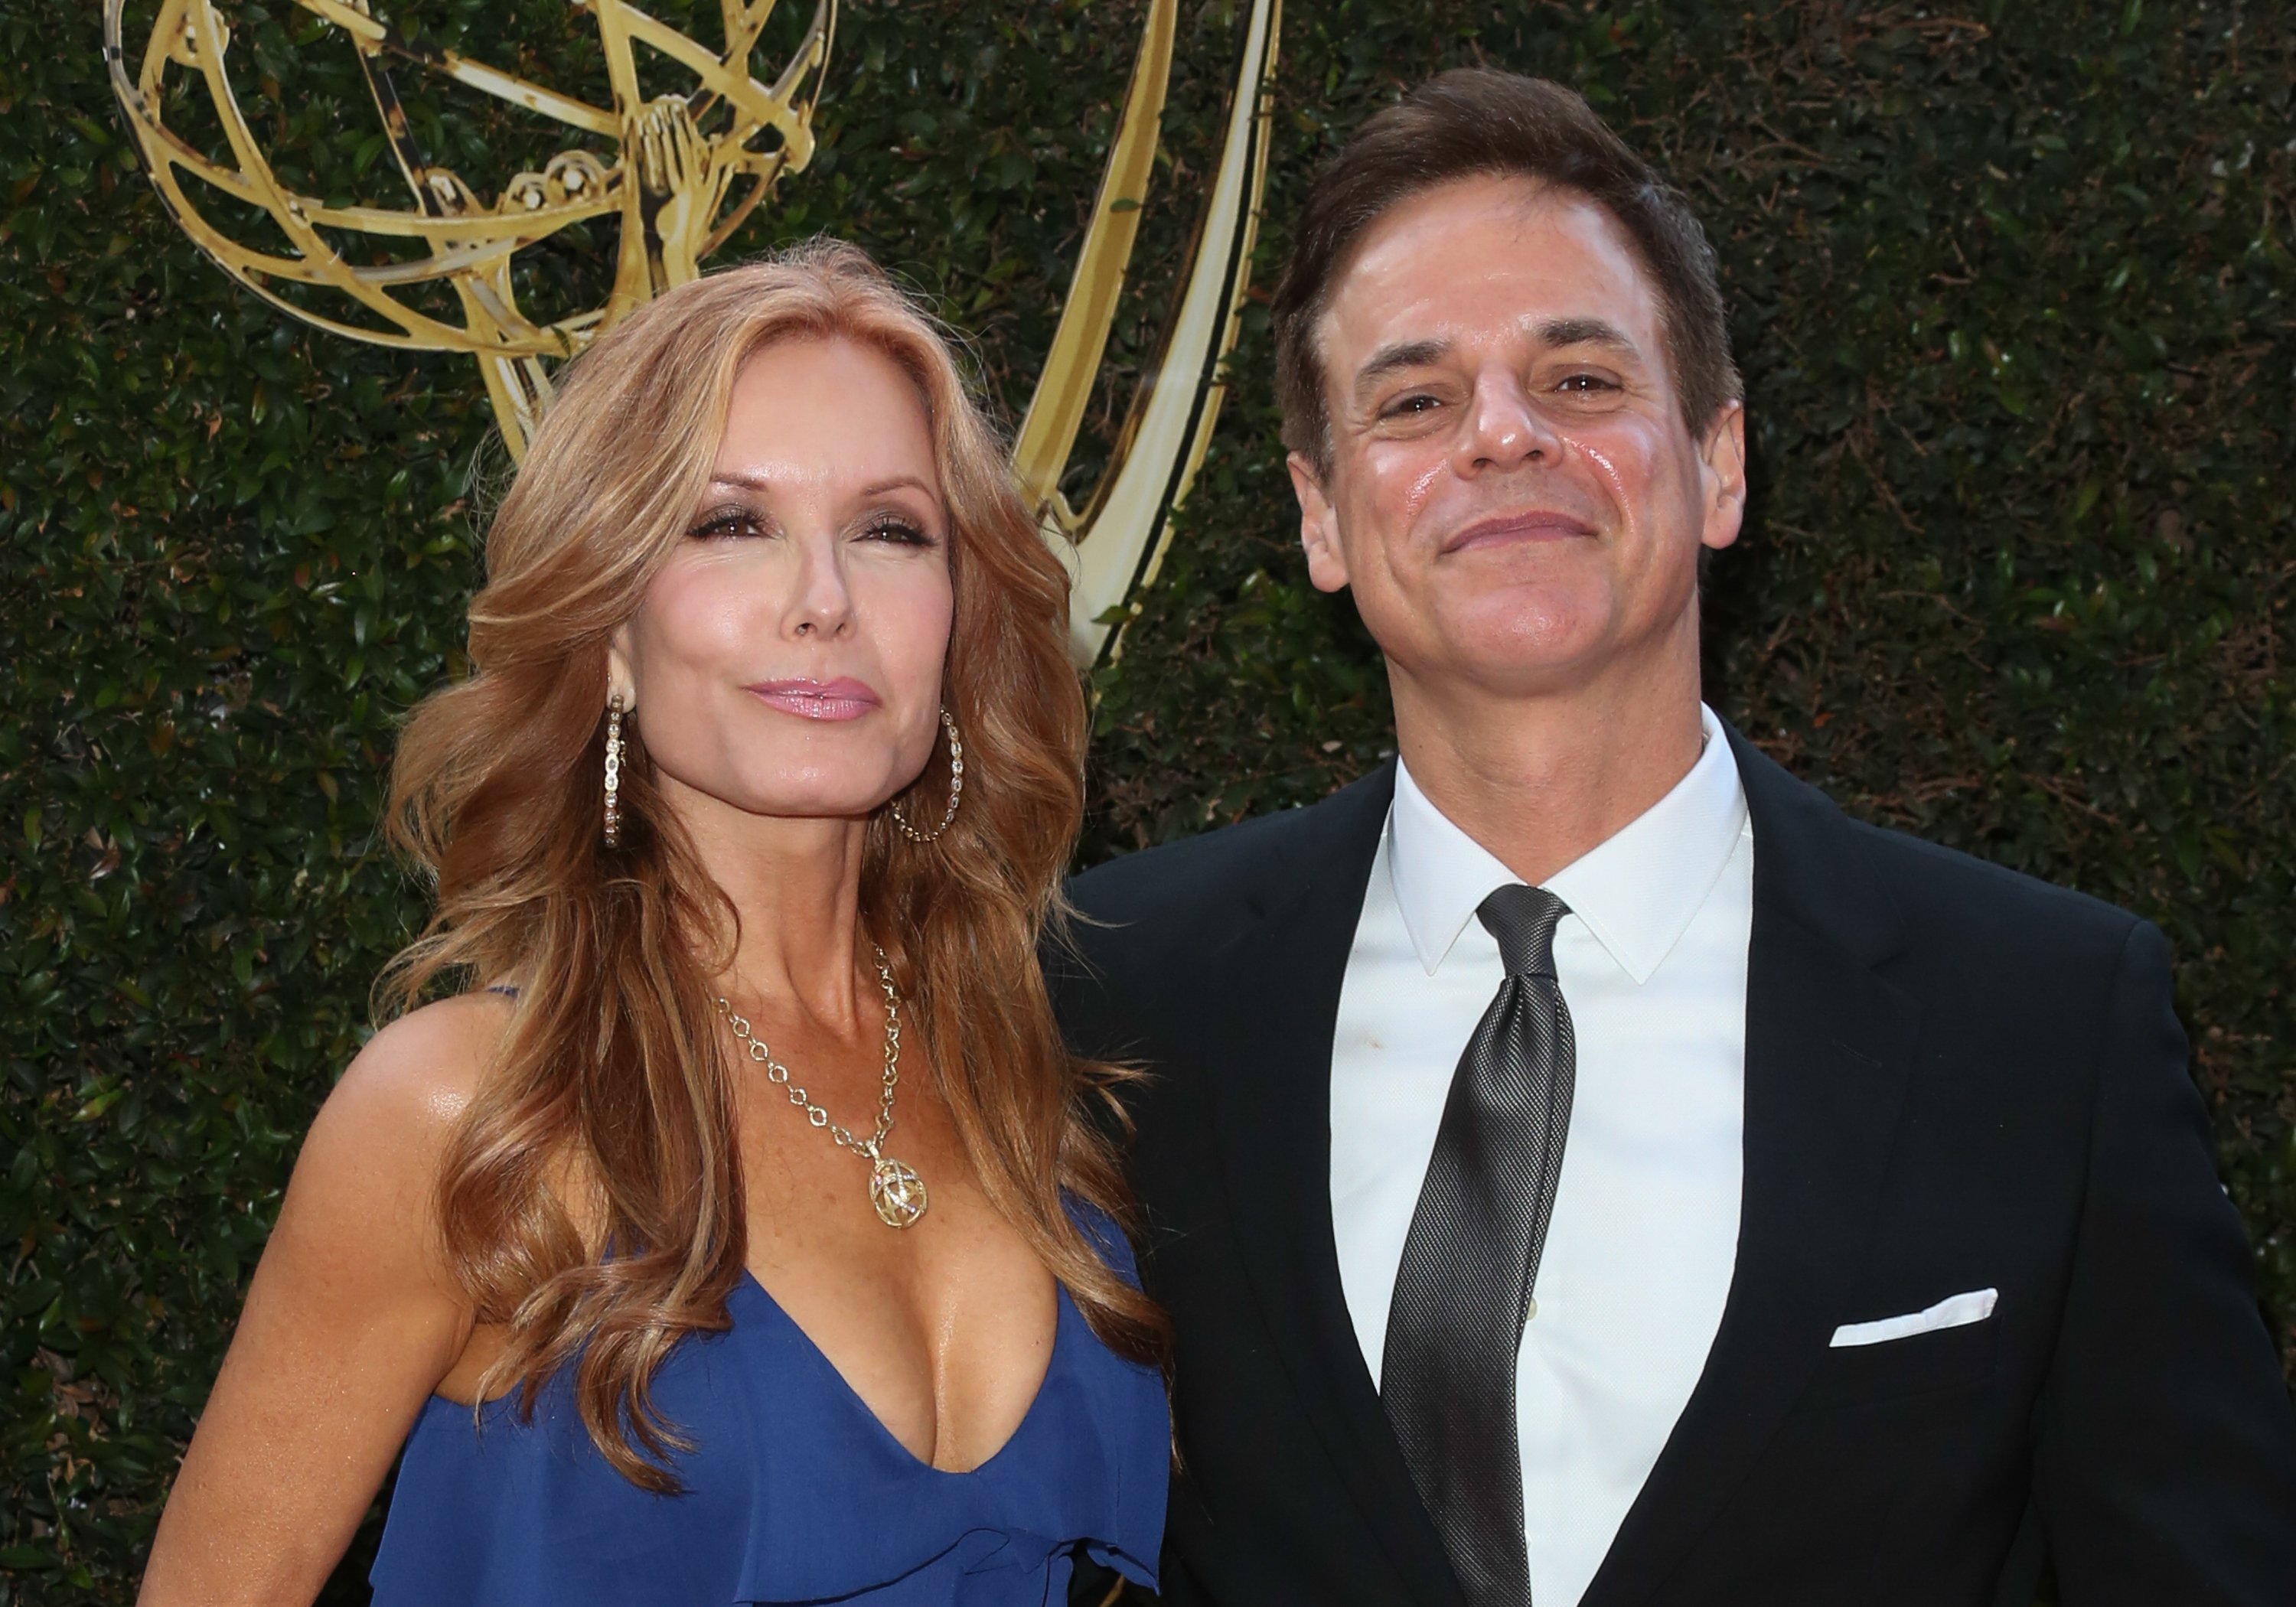 'The Young and the Restless' actor Tracey E. Bregman in a blue dress and Christian LeBlanc in a tuxedo.